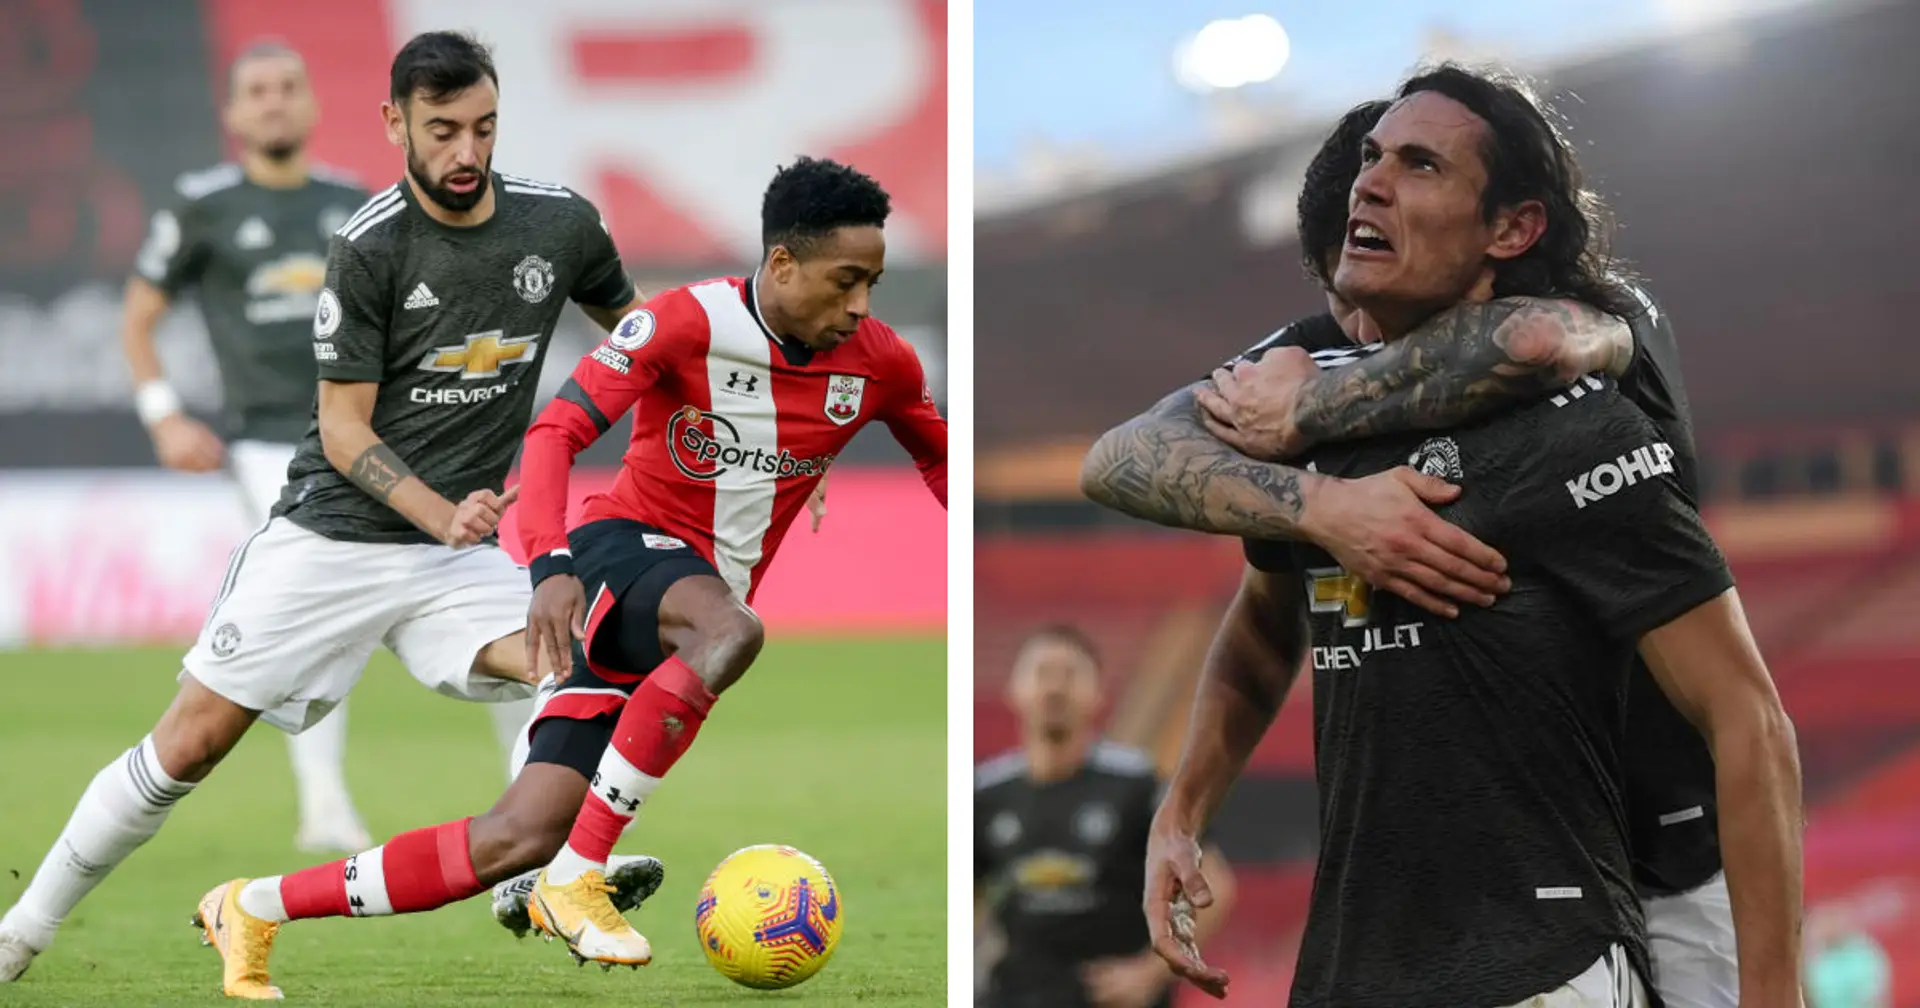 Bruno Fernandes and Edinson Cavani included on BBC's Team of The Week